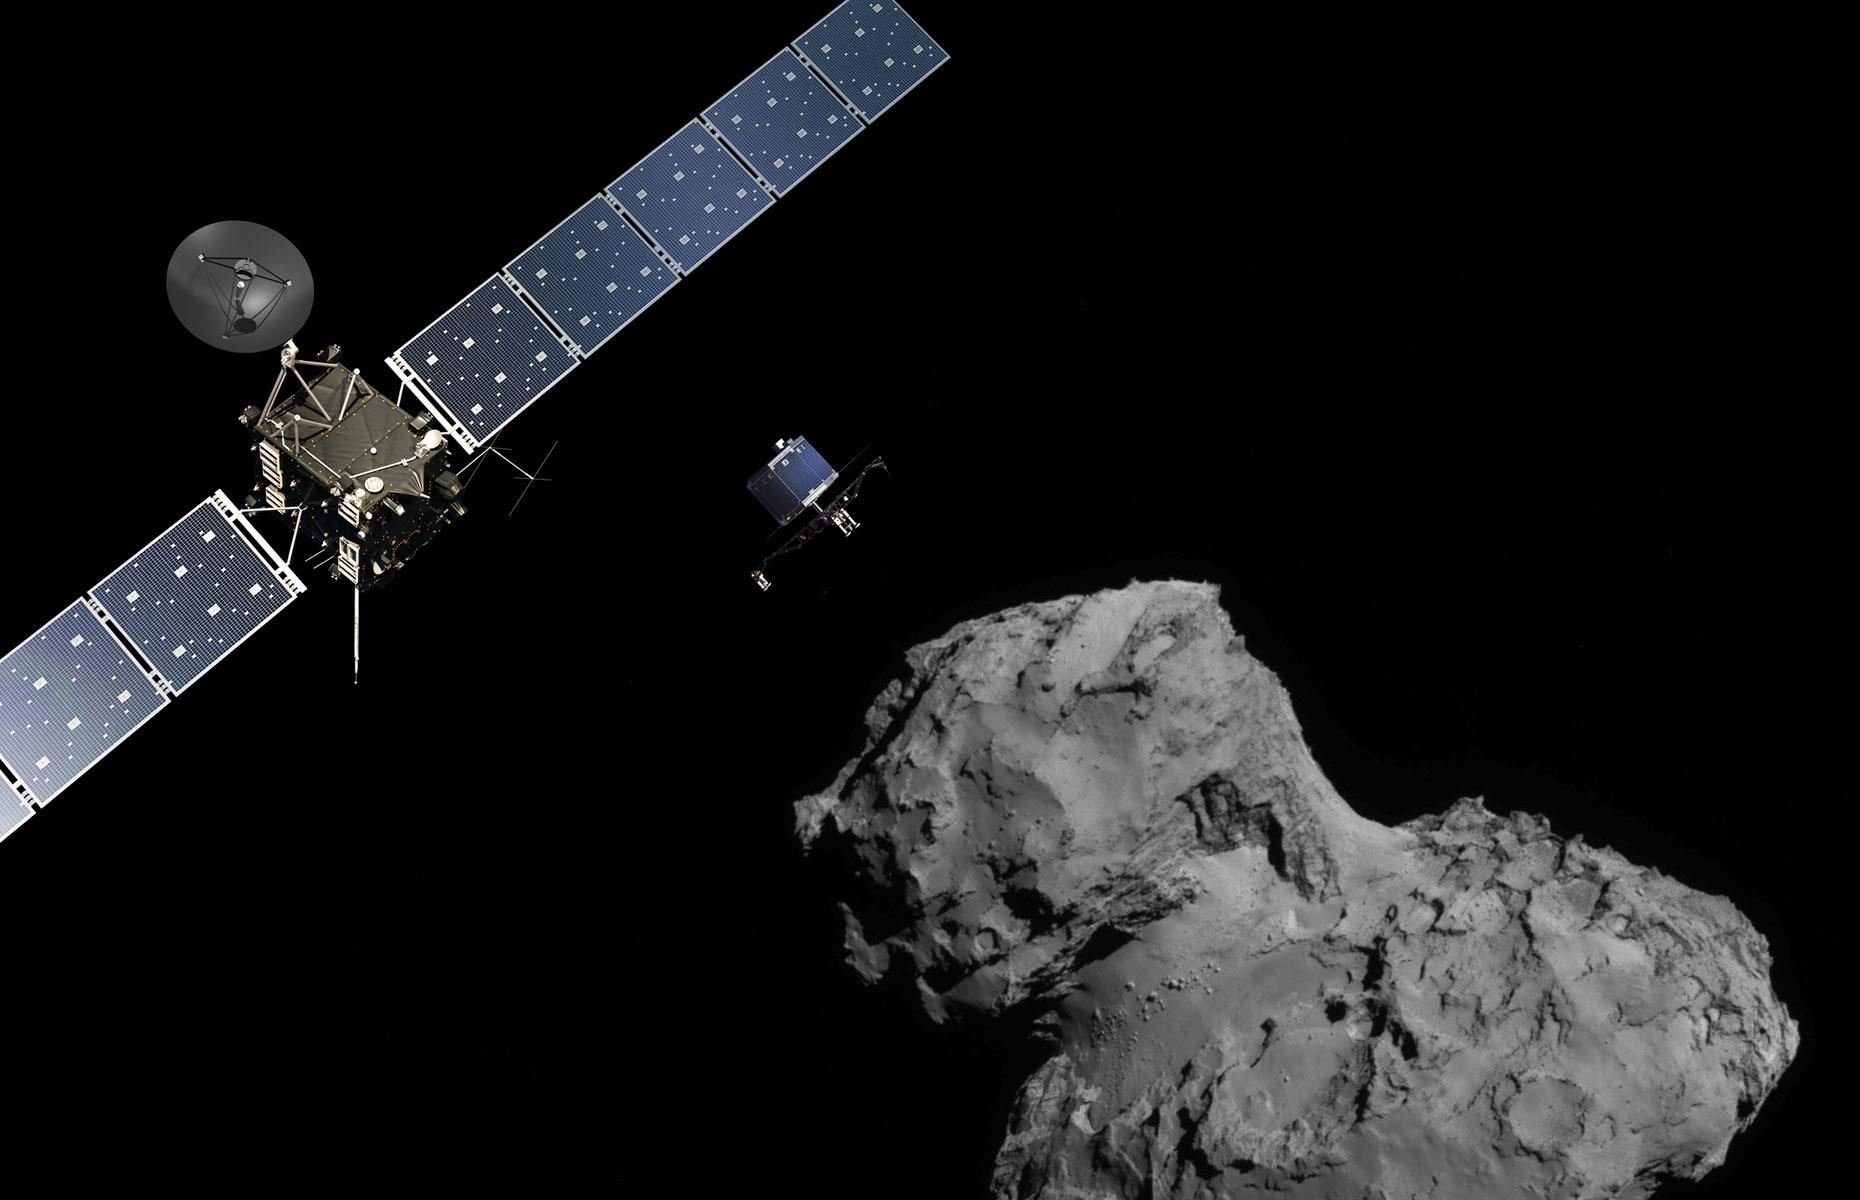 <p>The European Space Agency's Rosetta probe carried out a detailed analysis of Comet 67P/Churyumov-Gerasimenko and ended its mission in spectacular fashion on 30 September 2016 by crash-landing in the comet's Ma'at region.</p>